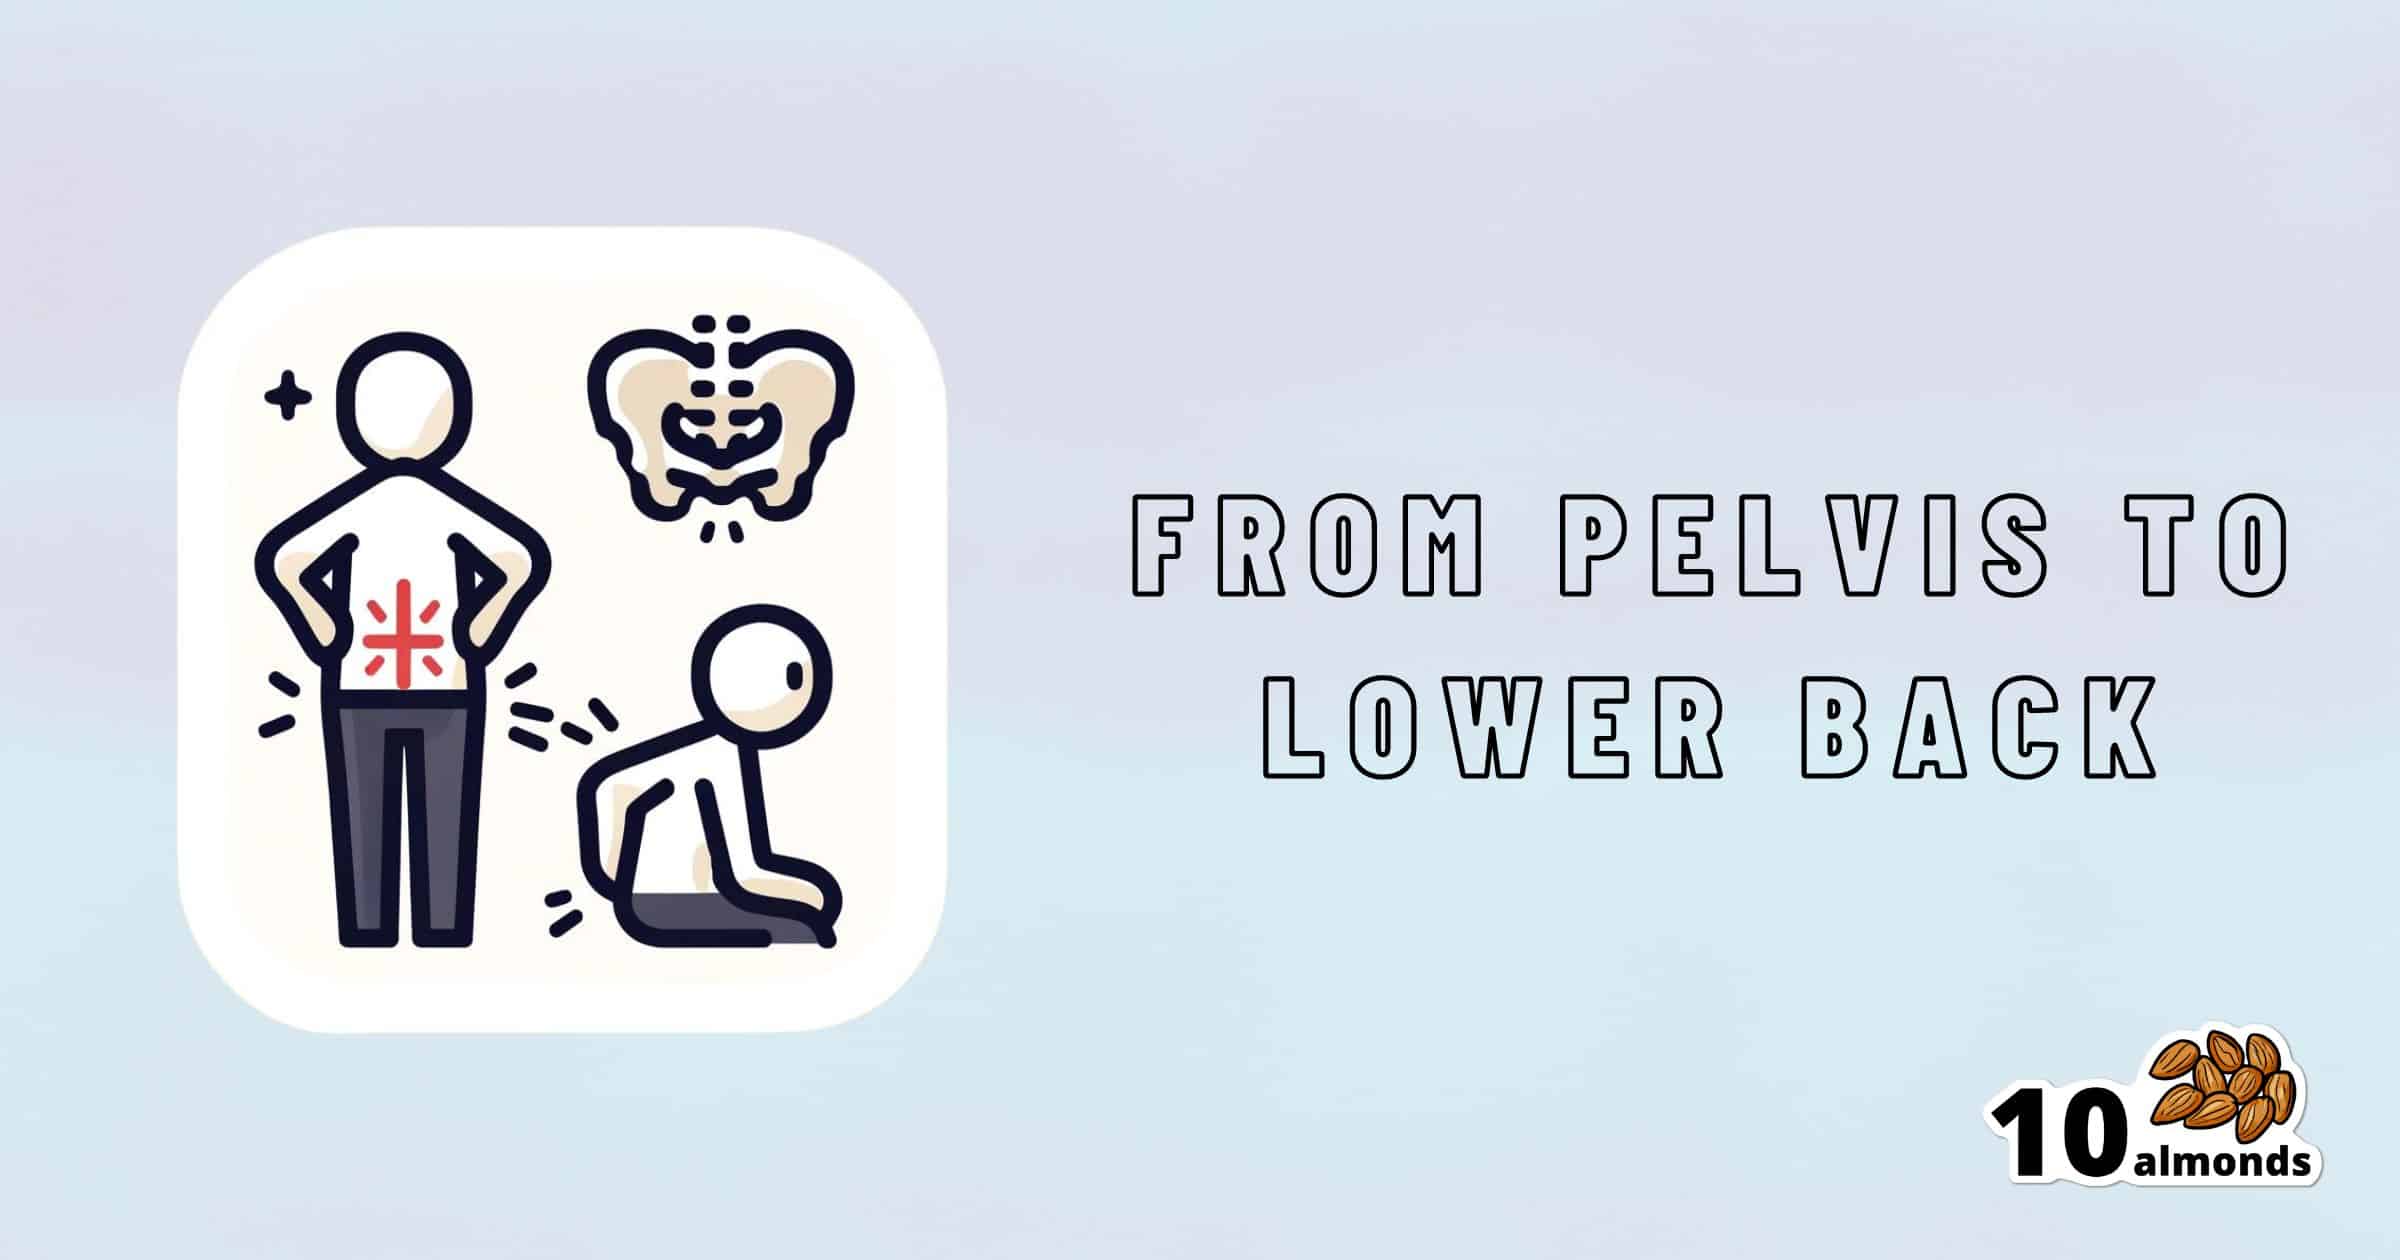 A graphic shows a person holding their lower back next to another person sitting hunched over. Above them is a pelvis illustration. The text reads, "From Pelvis to Lower Back: Easing Lower Back Pain." In the bottom right corner are the words "10 almonds" with an image of almonds.